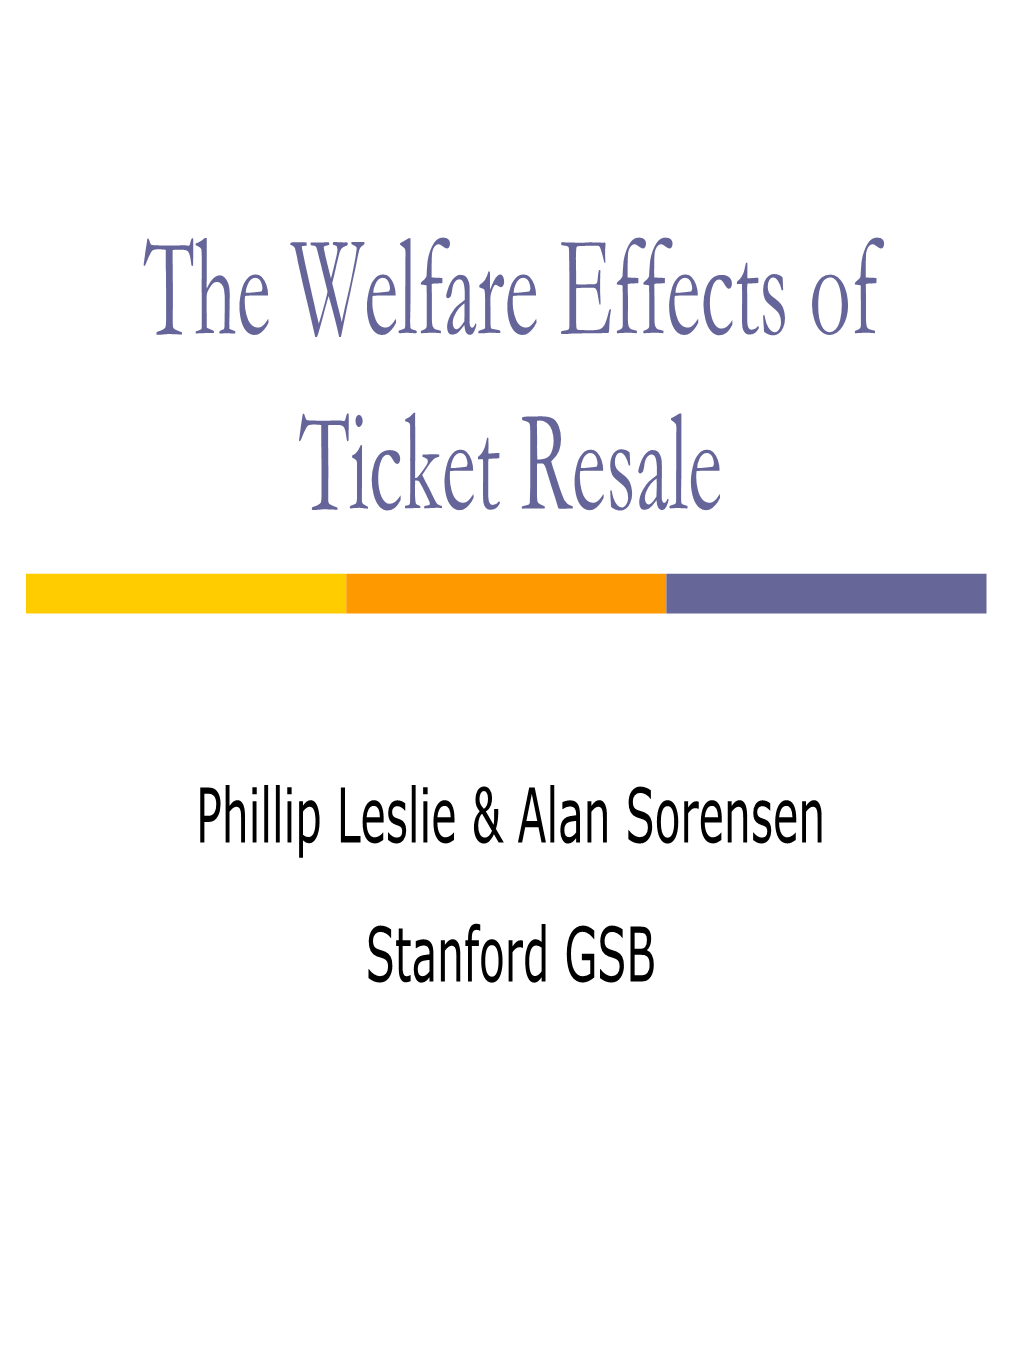 The Welfare Effects of Ticket Resale